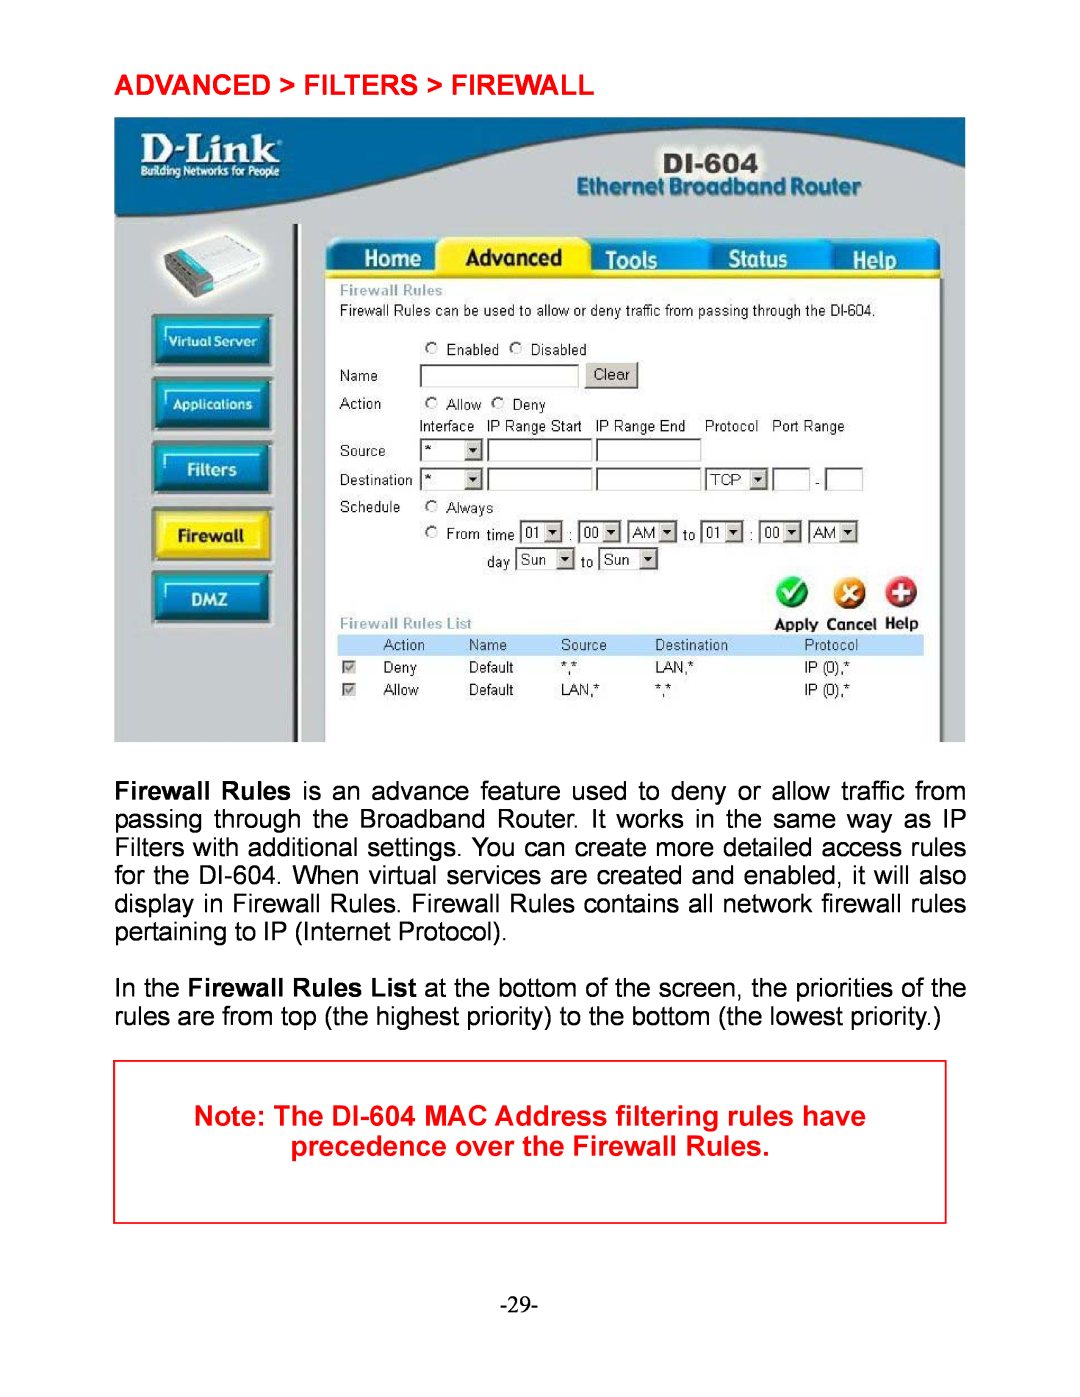 D-Link Advanced Filters Firewall, Note The DI-604 MAC Address filtering rules have, precedence over the Firewall Rules 